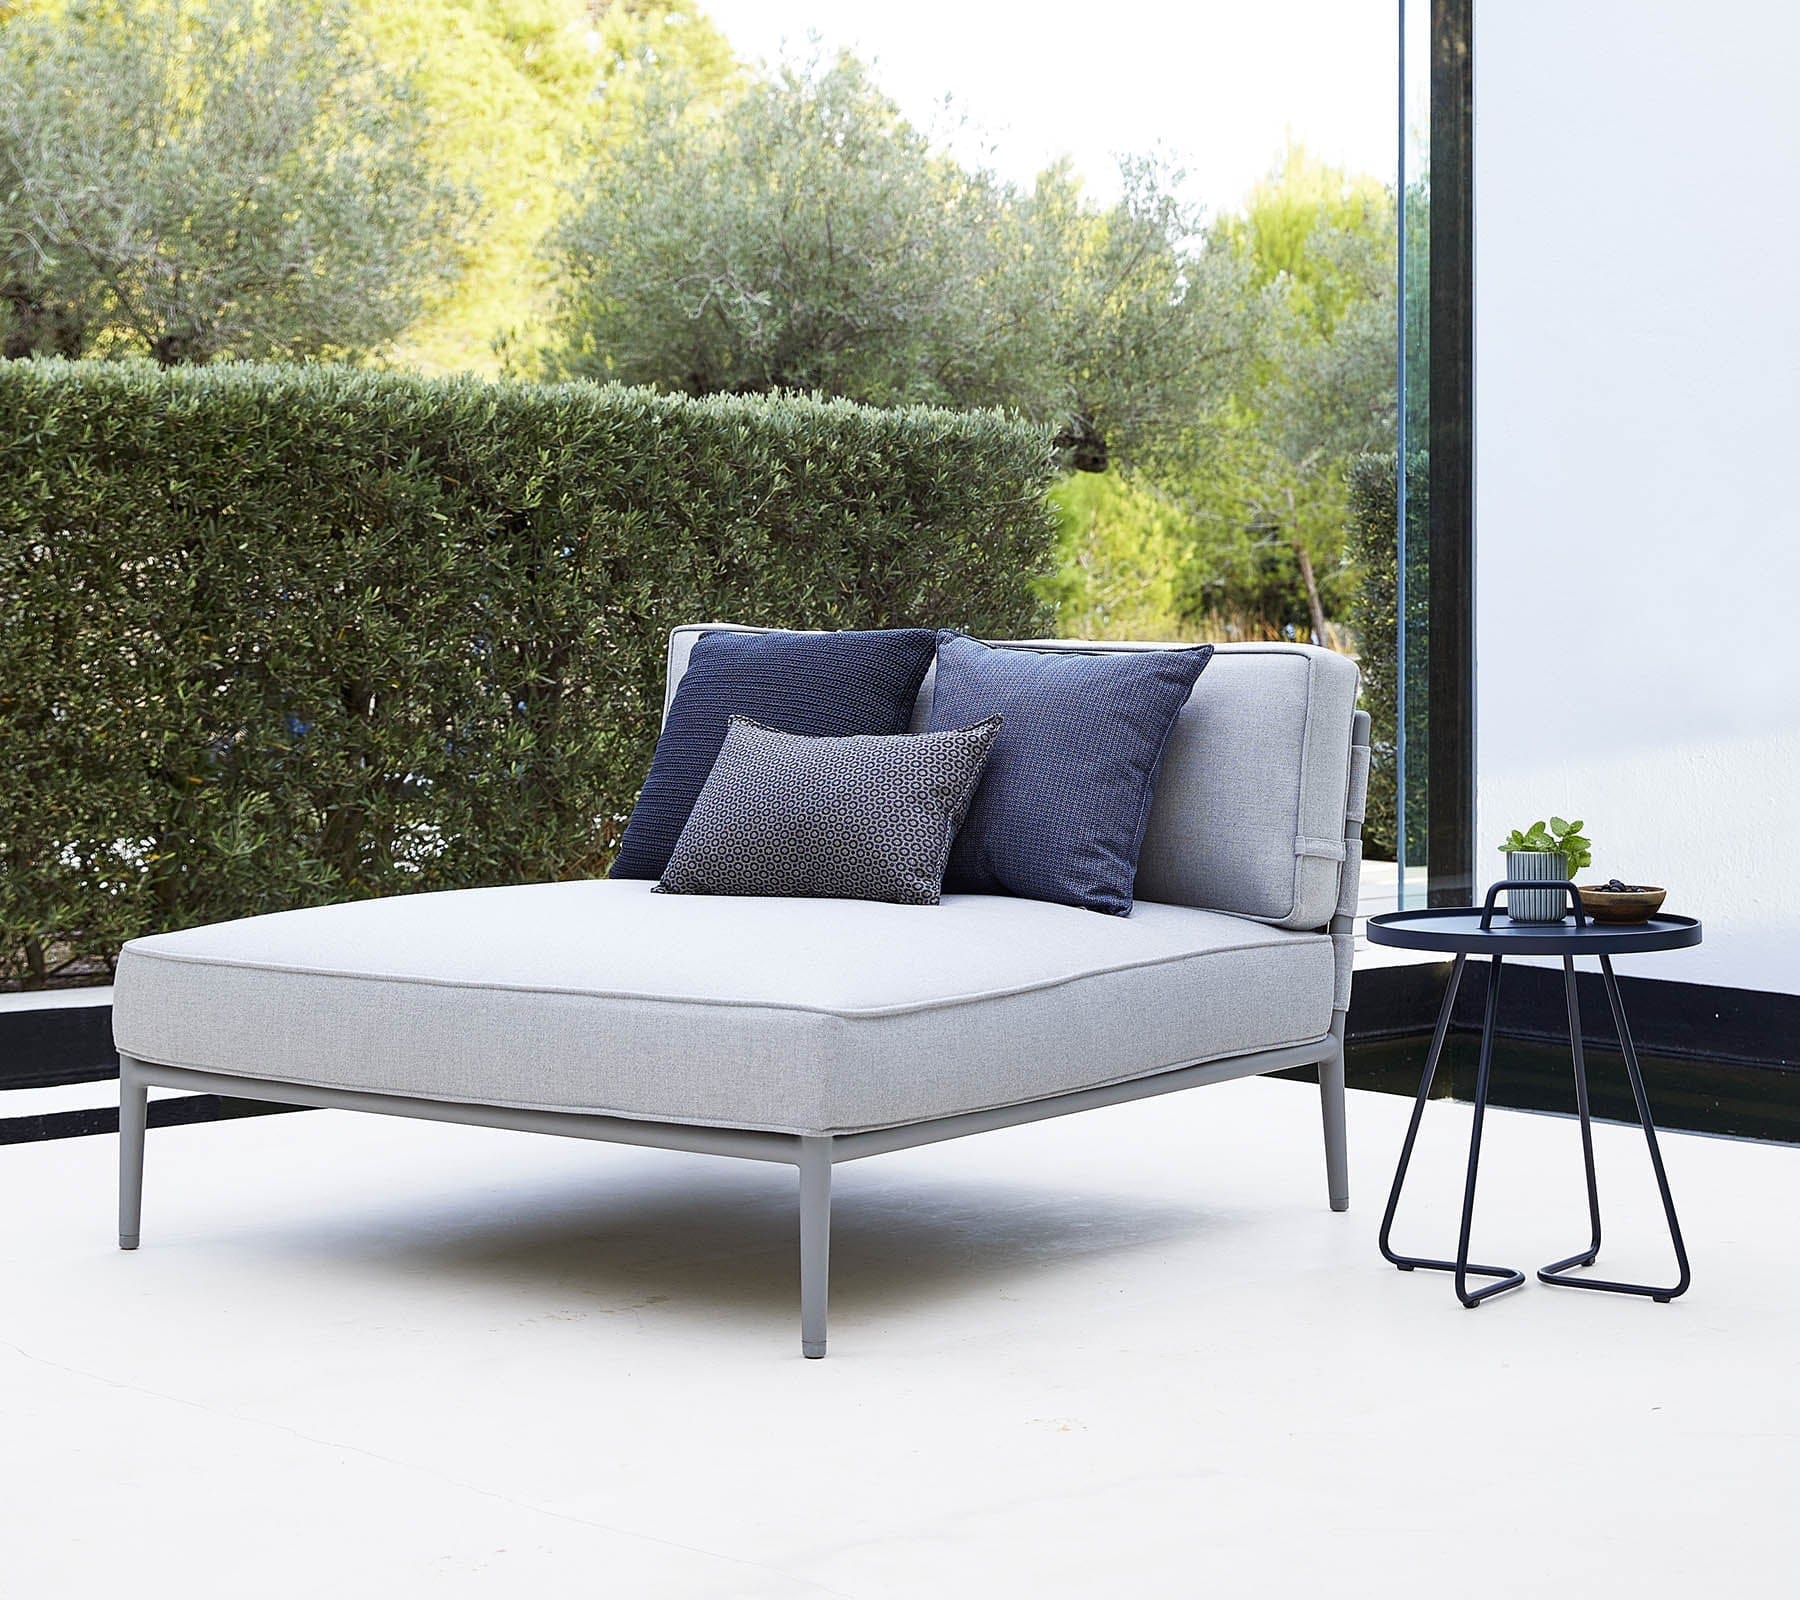 Boxhill's Conic Lounge Sectional Daybed Light Grey lifestyle image at patio